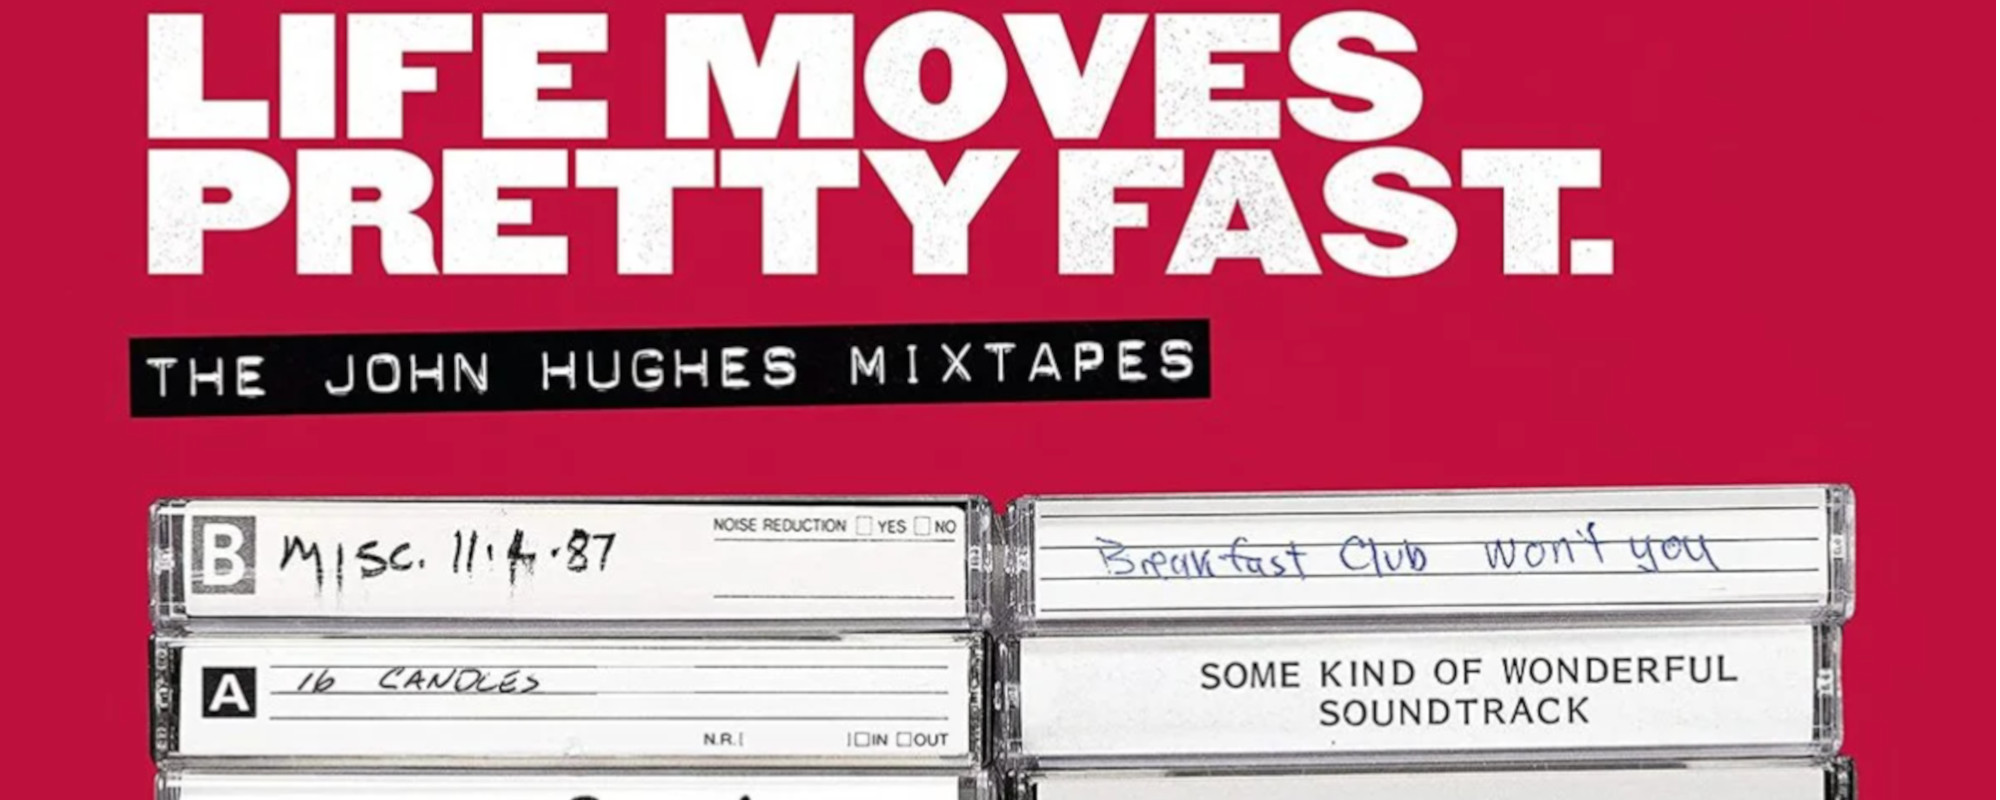 John Hughes Classic ’80s Soundtracks to Be Released as a Box Set